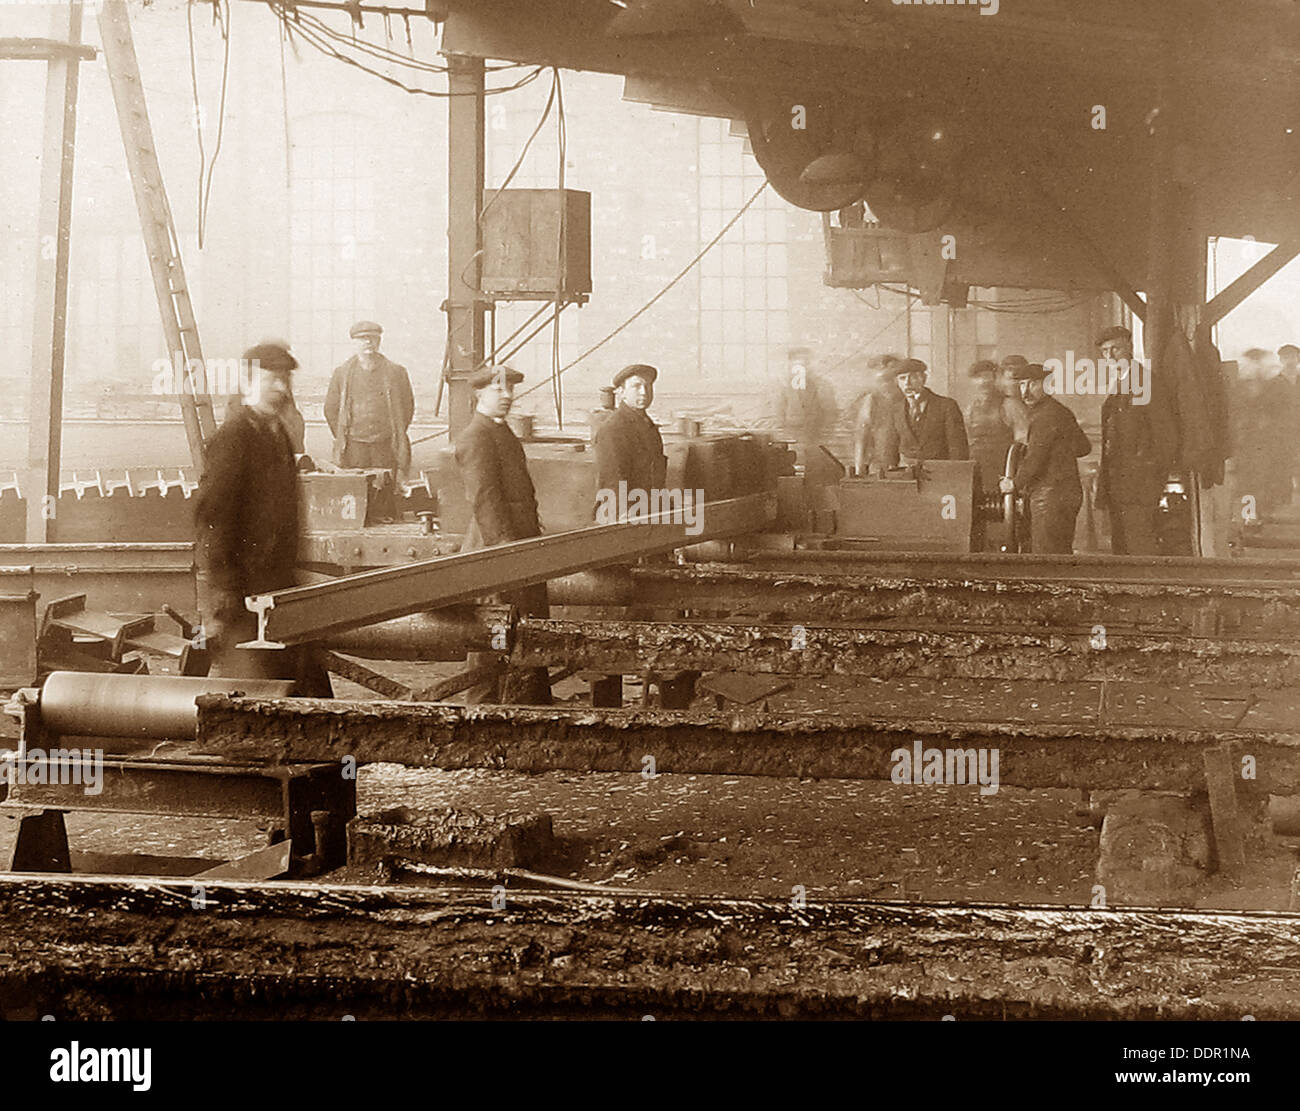 Hunslet Steel Works early 1900s Stock Photo